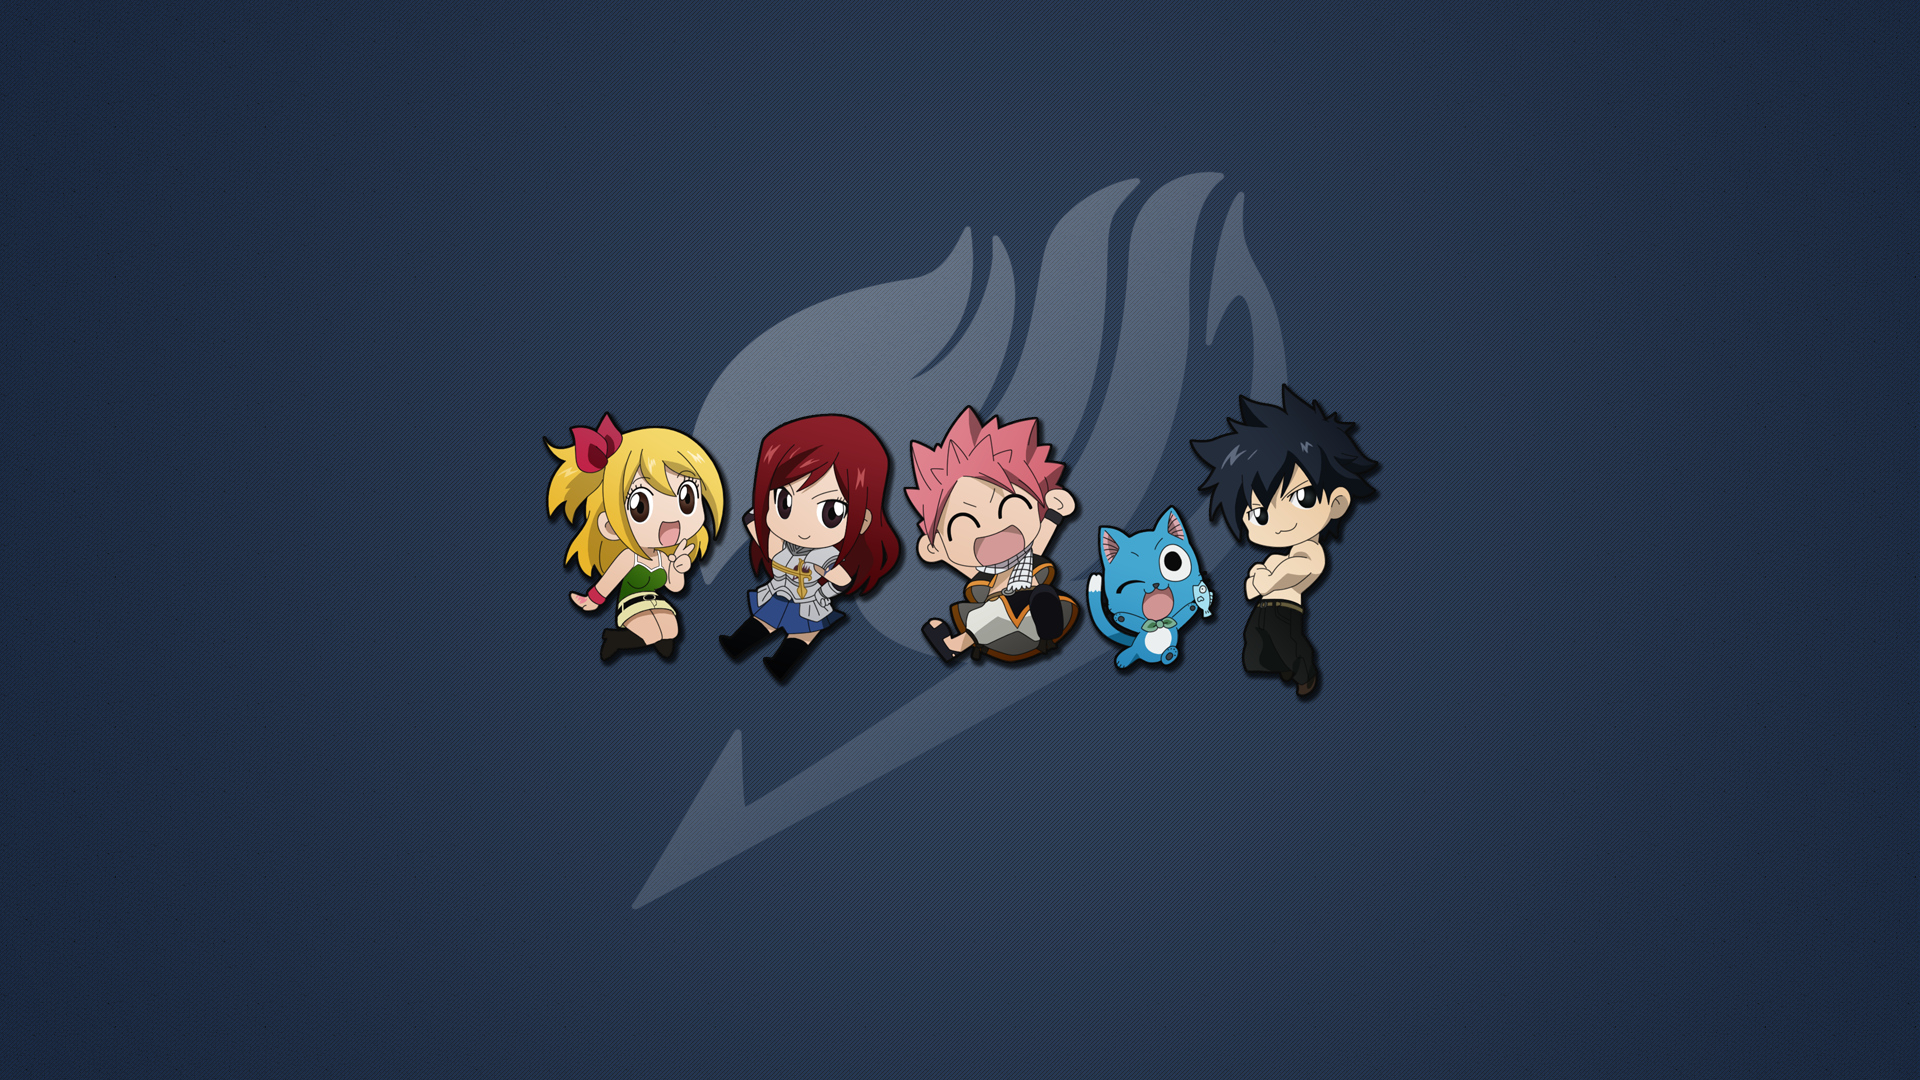 Fairy Tail wallpaper by LordMycelium 1920x1080